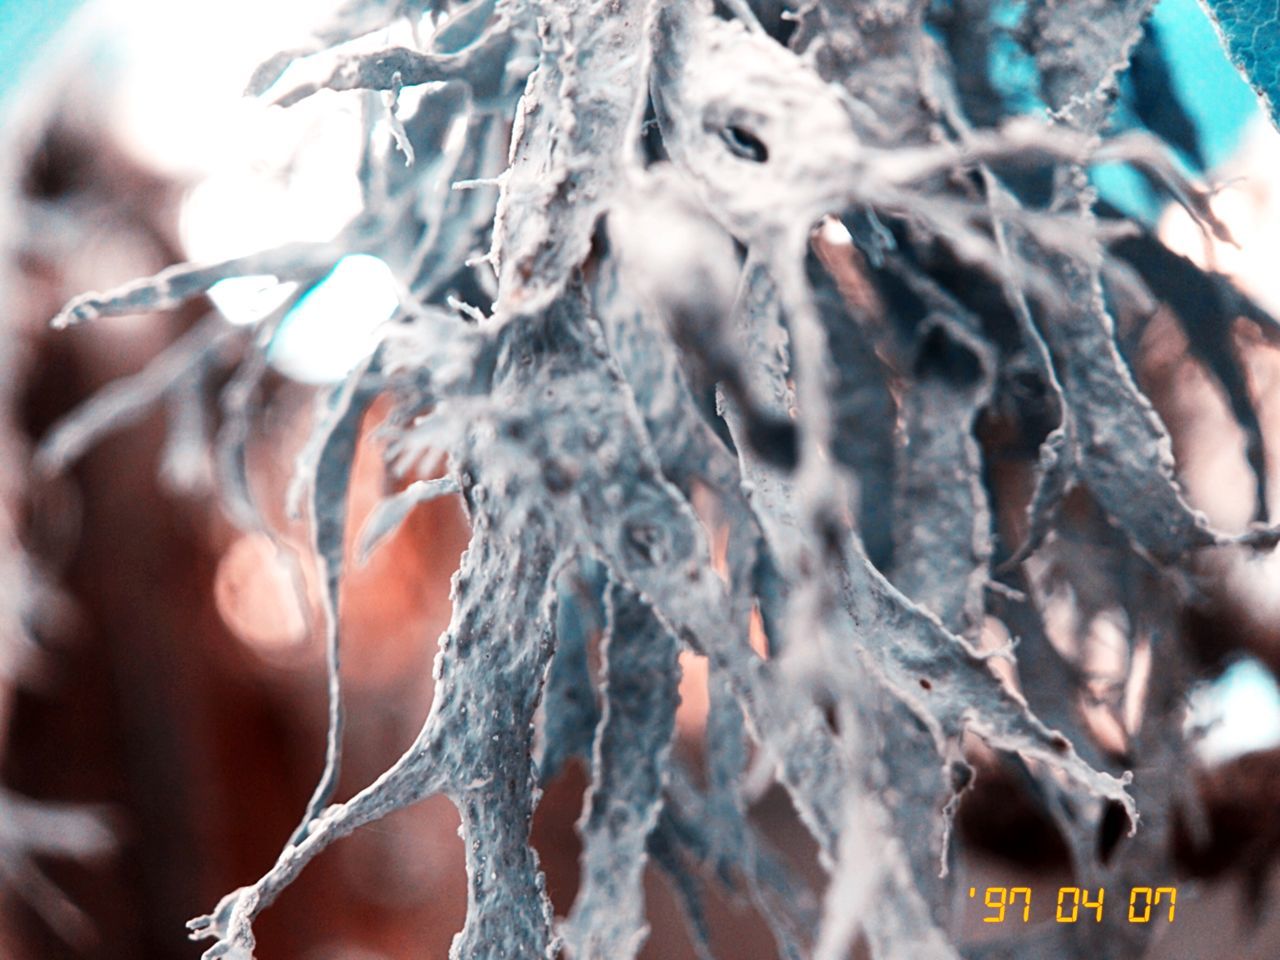 close-up, ice, full frame, frozen, no people, cold temperature, day, outdoors, nature, backgrounds, water, healthy eating